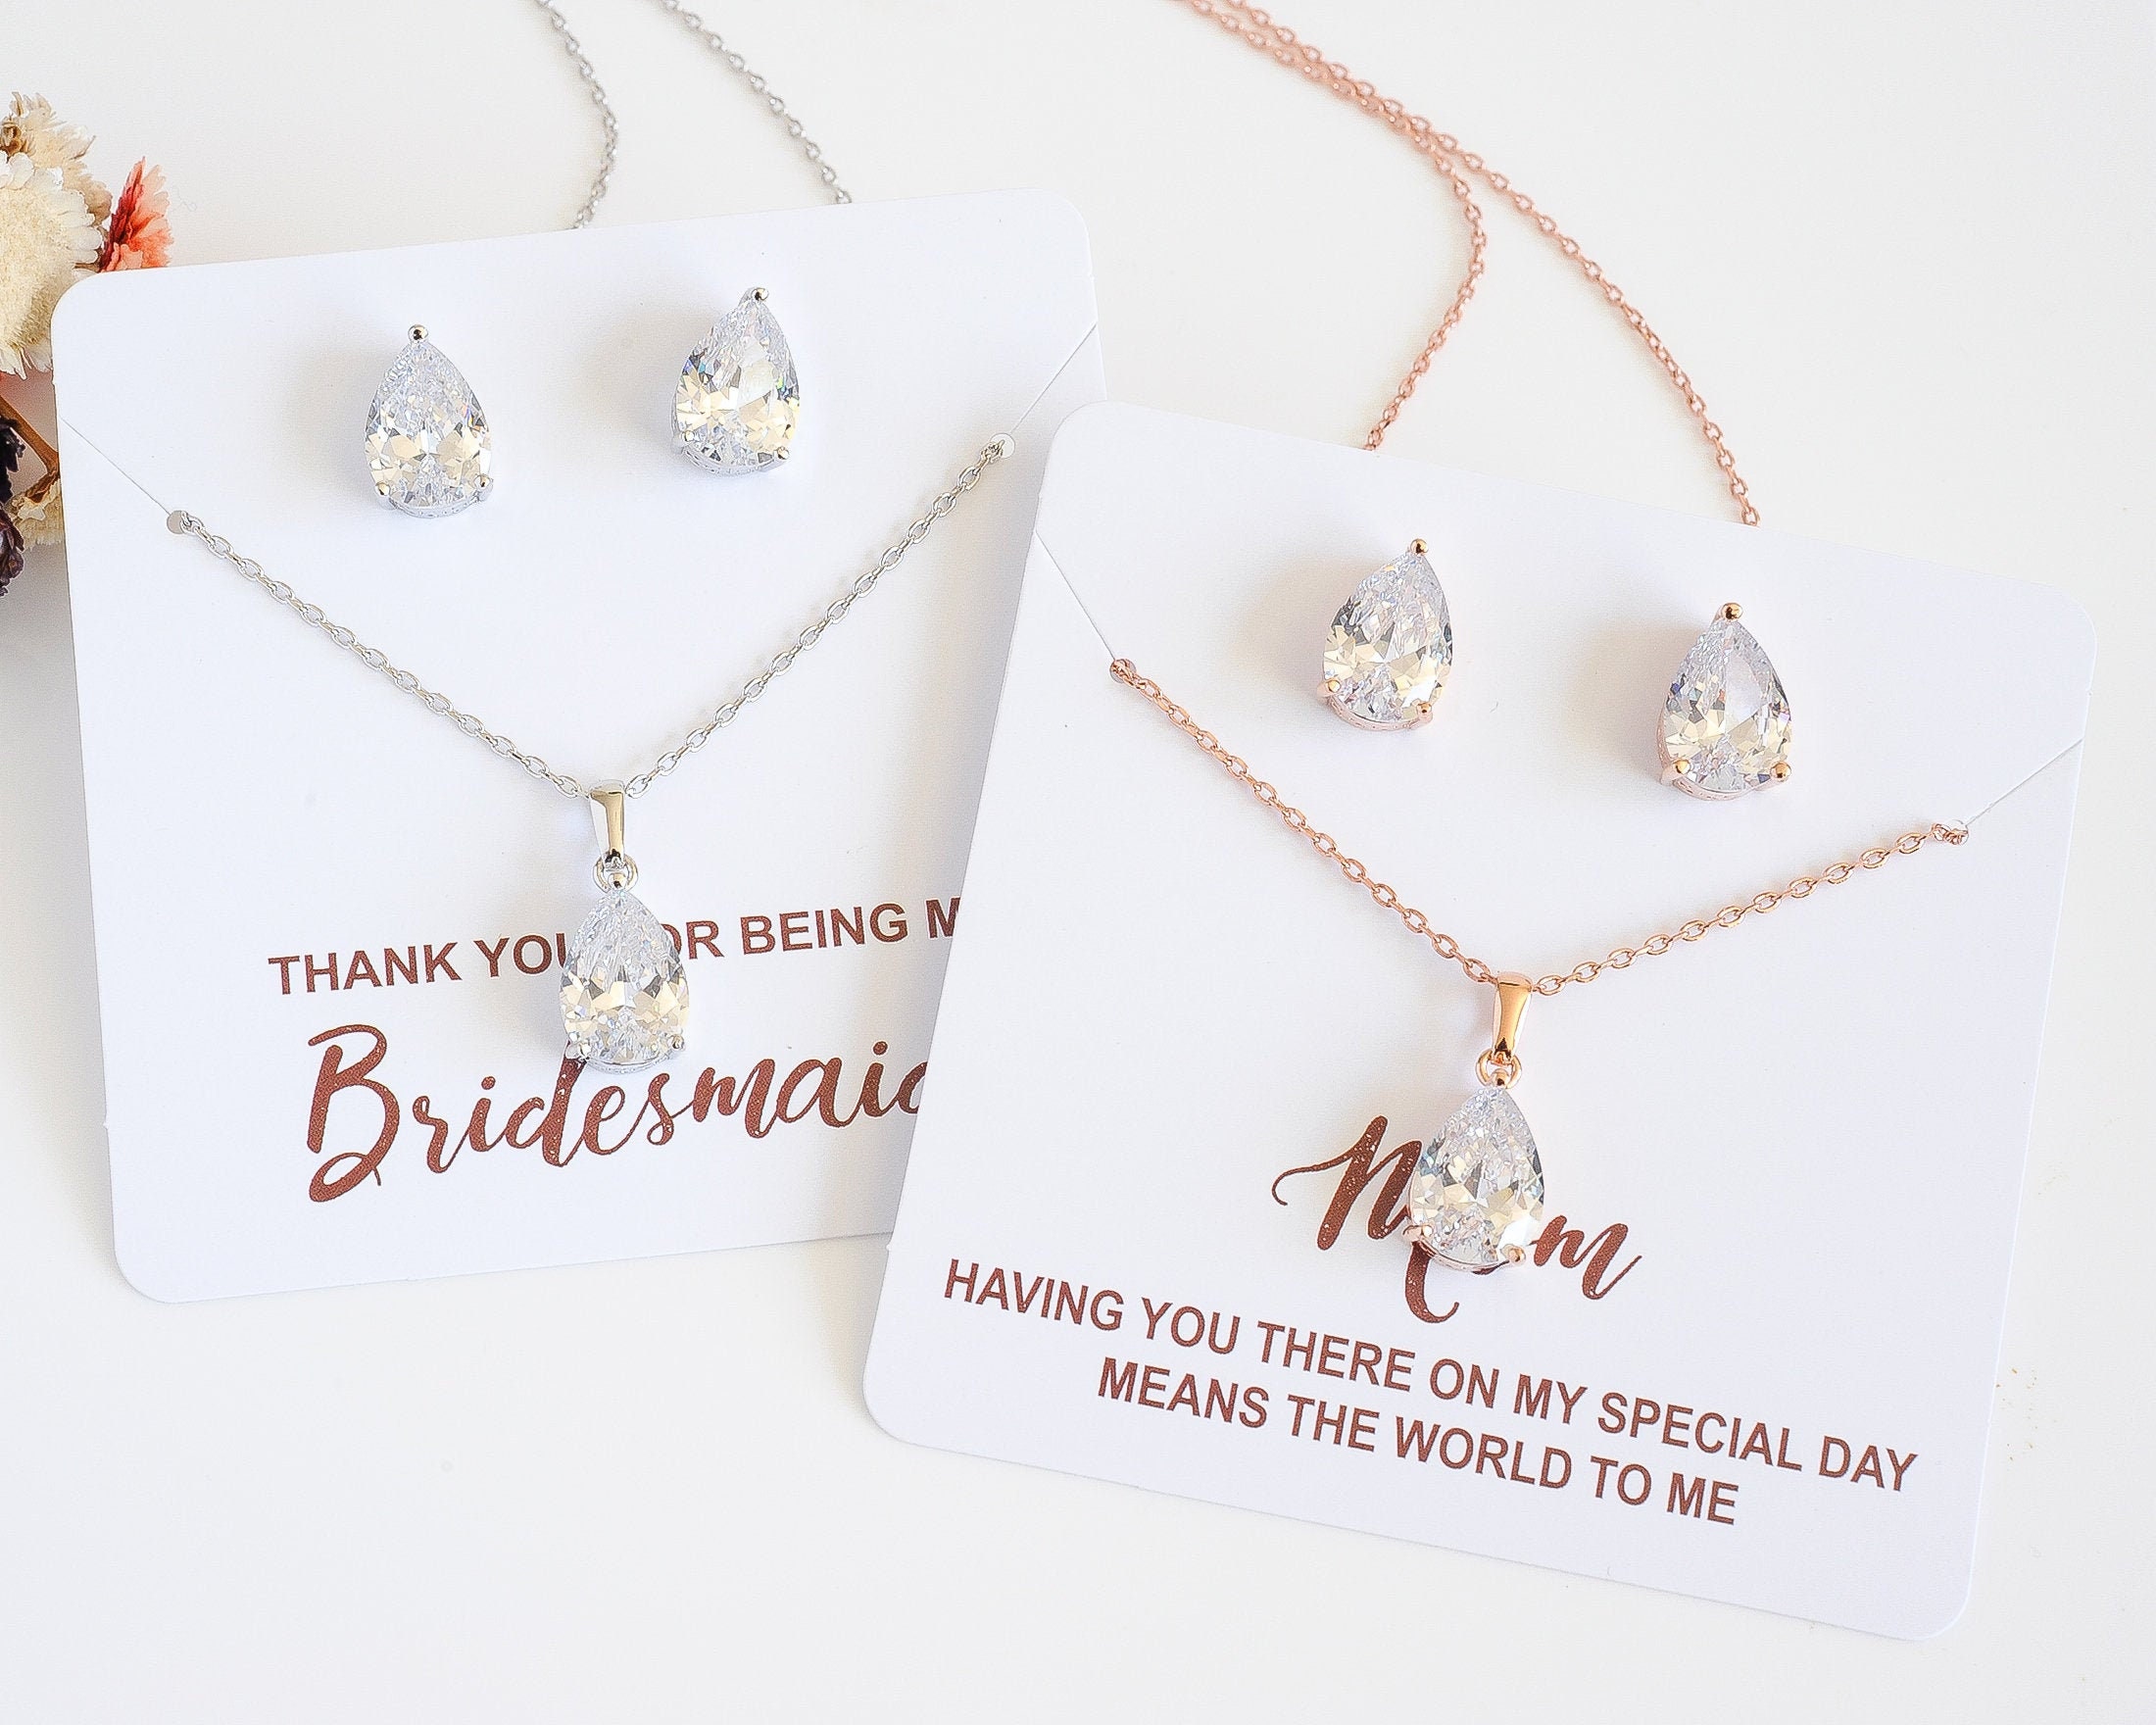 Bridesmaid Necklaces Archives - Ivory & Co